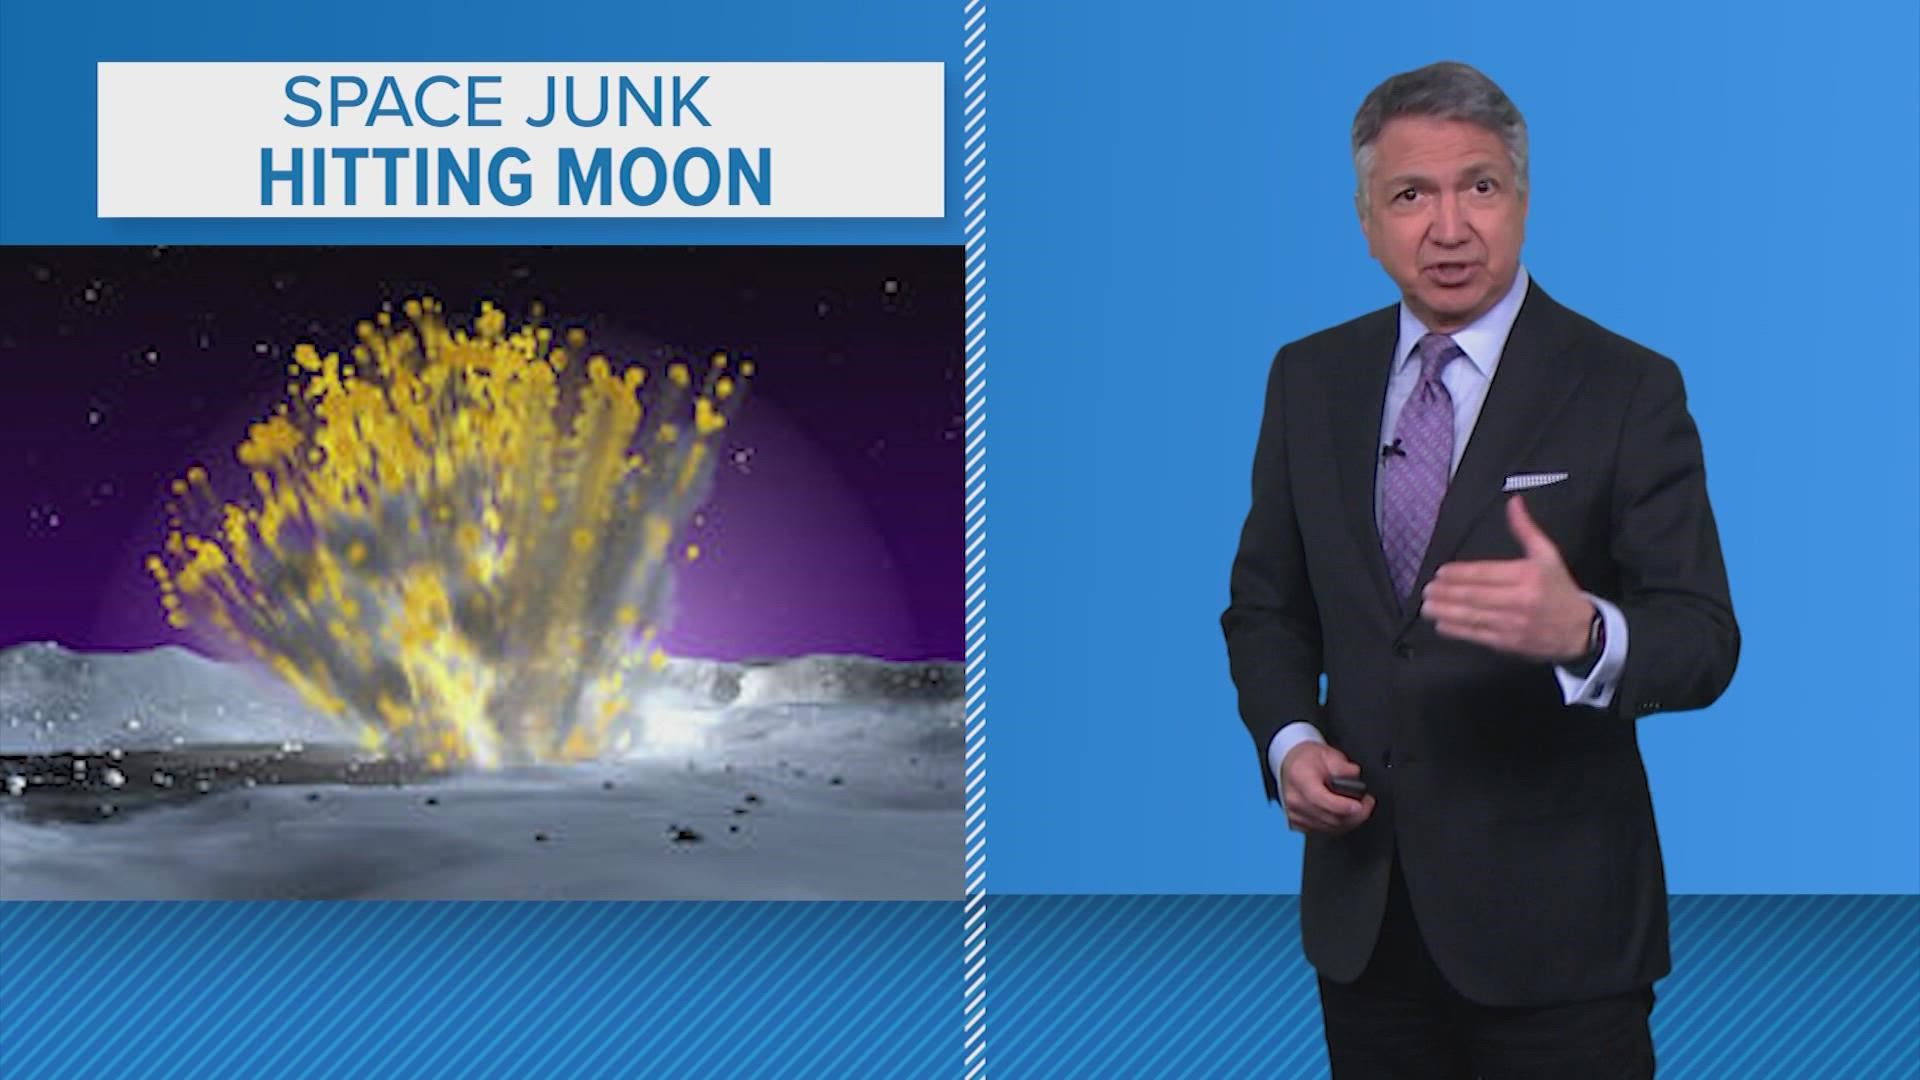 Experts say the moon will get a new crater after it's hit by space junk Friday morning, but there's a debate on where the junk is coming from.